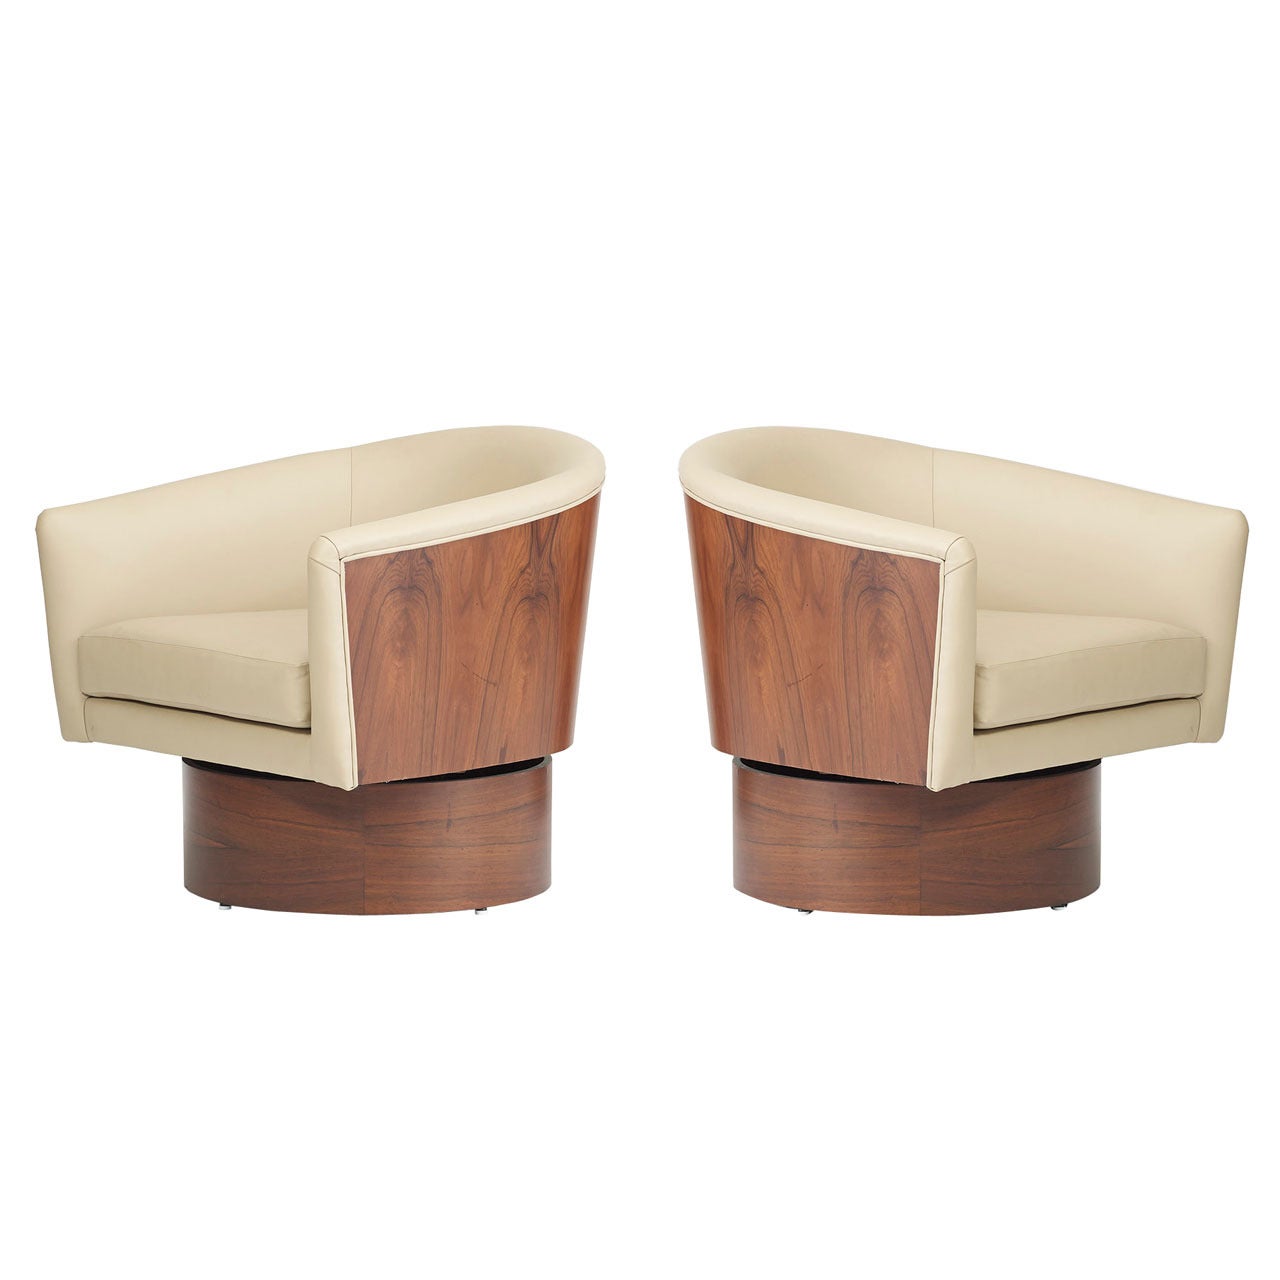 lounge chairs, pair by Milo Baughman for Thayer Coggin